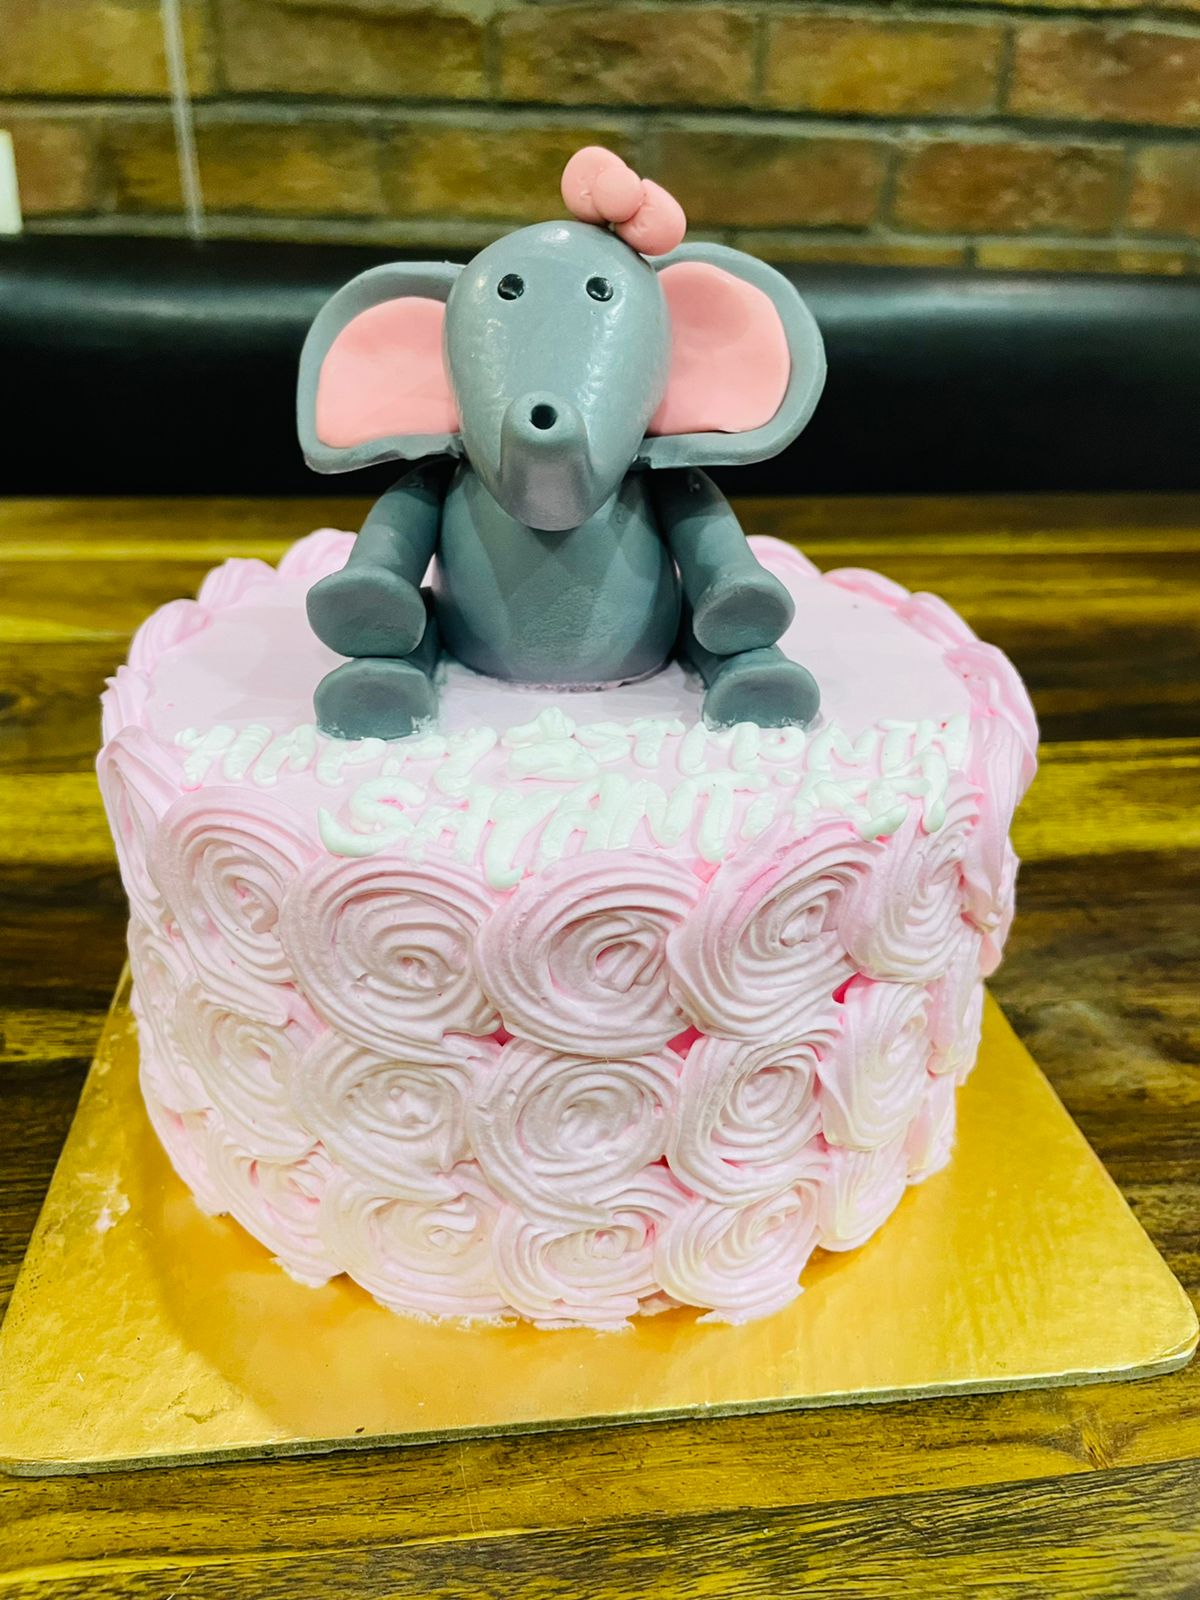 Elephant face cake for a little sweetheart's 3rd Birthday ❤️ #elephant  #elephantcake #elephantfacecake #homemade #honemadecake #homecooked... | By  Padma's Blissful Bakes - Facebook